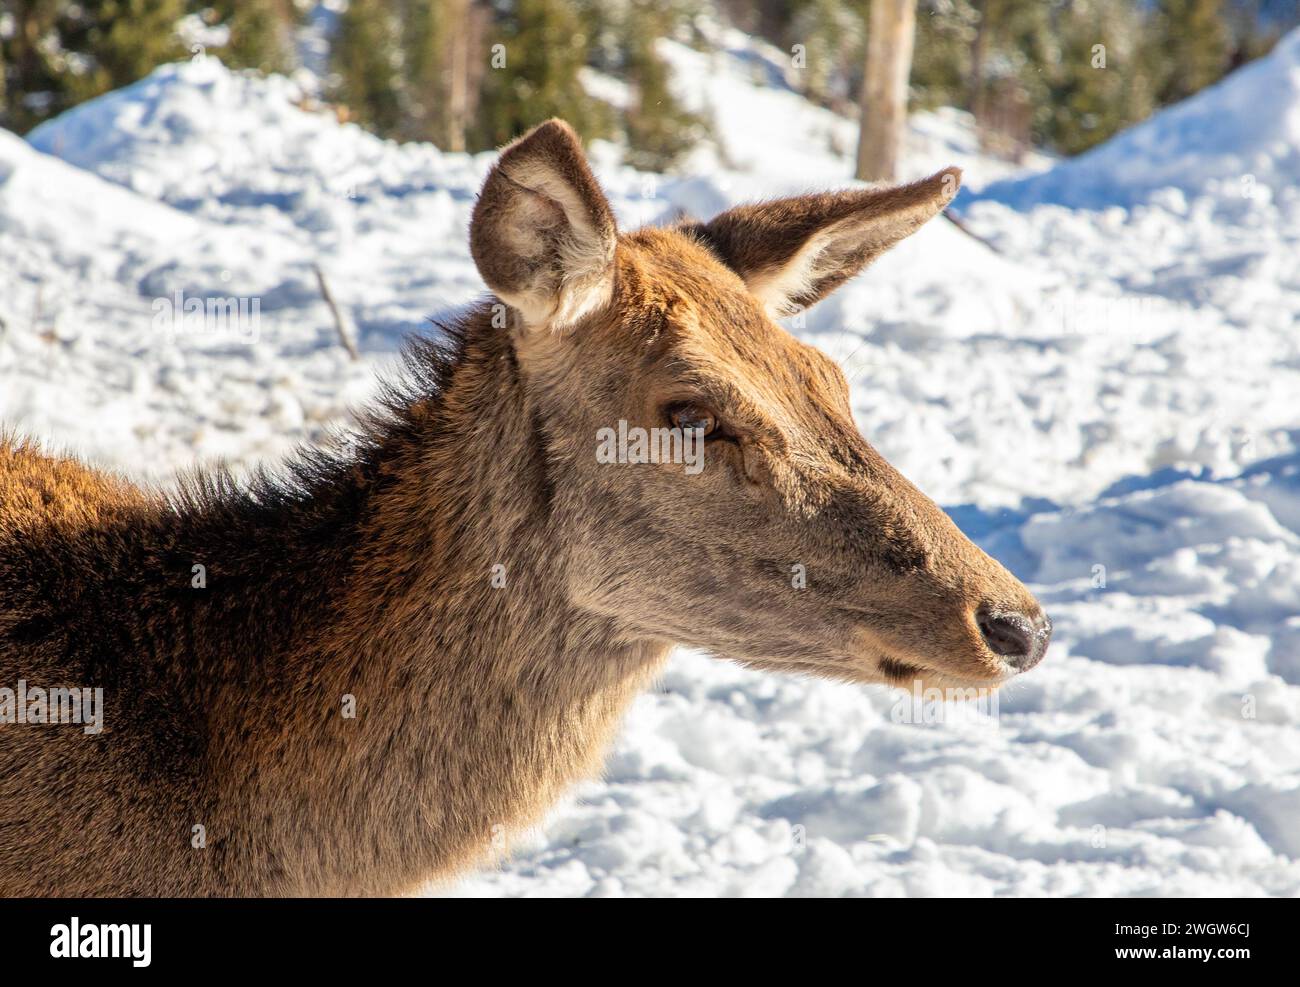 A close-up with the profile of the head of a female Carpathian deer Stock Photo